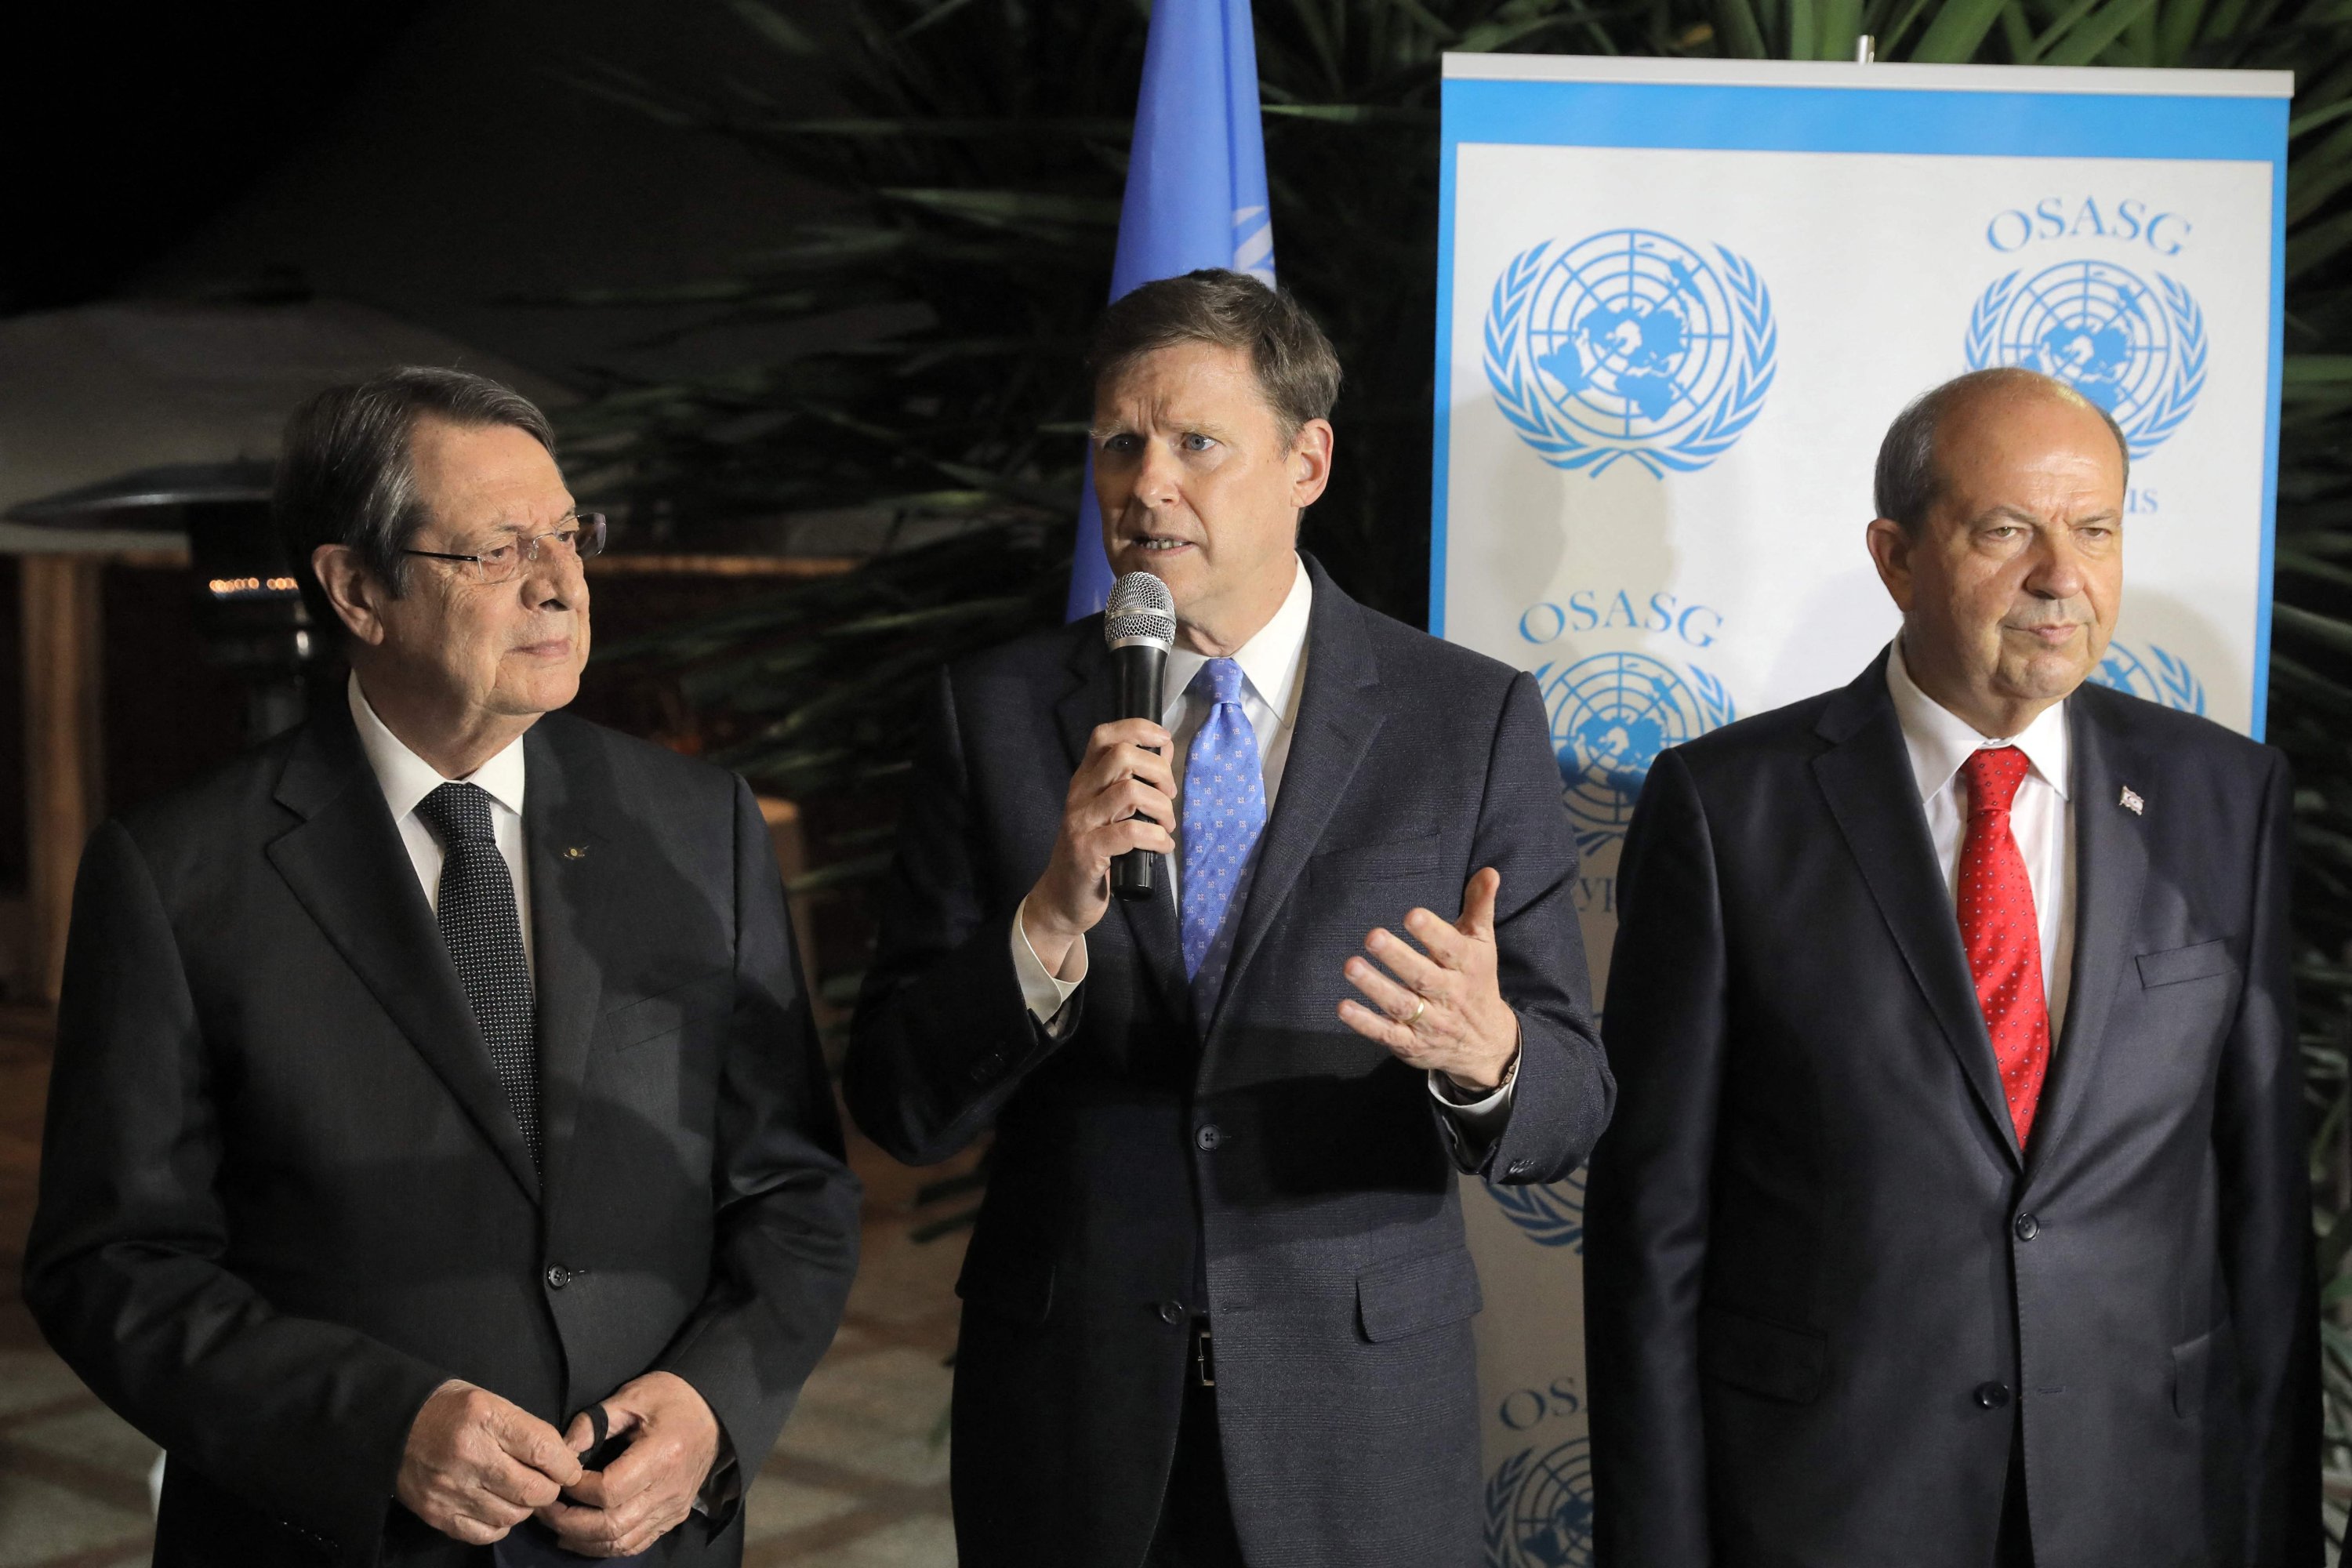 Colin Stewart (C), head of the United Nations Peacekeeping Force in Cyprus (UNFICYP), speaks while accompanied by Greek Cypriot leader Nicos Anastasiades (L) and Turkish-Cypriot leader Ersin Tatar during a reception at Ledra Palace in the U.N. buffer zone in the Cypriot capital Nicosia, (Lefkoşa), Dec. 14, 2021. (AFP Photo)